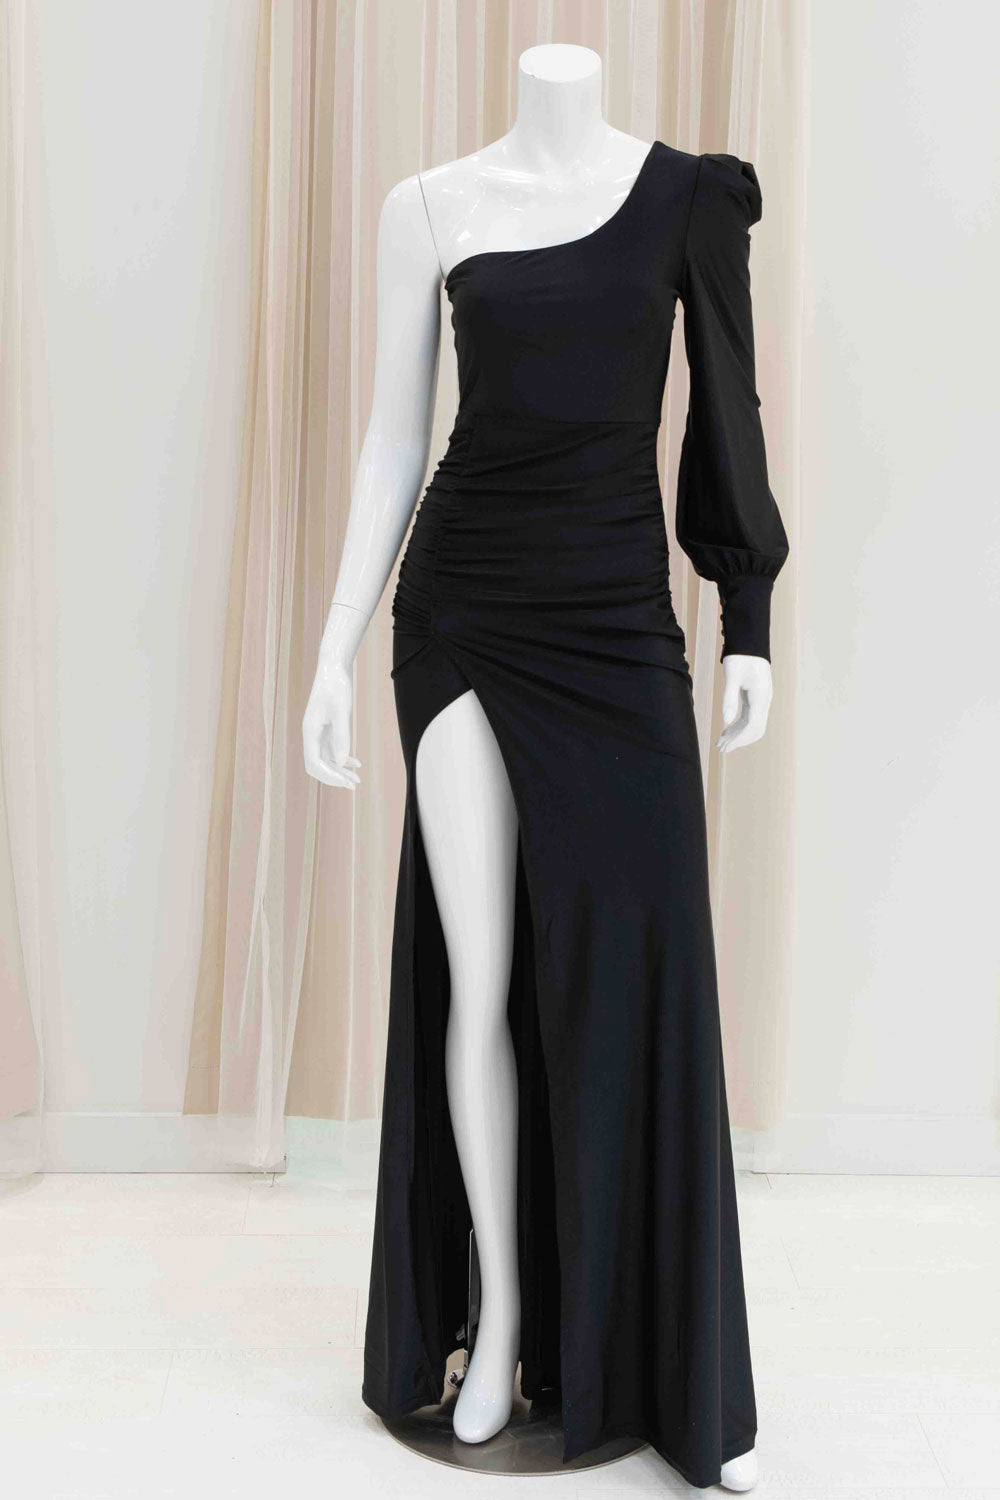 One Sleeve Stretchy Black Evening Gown